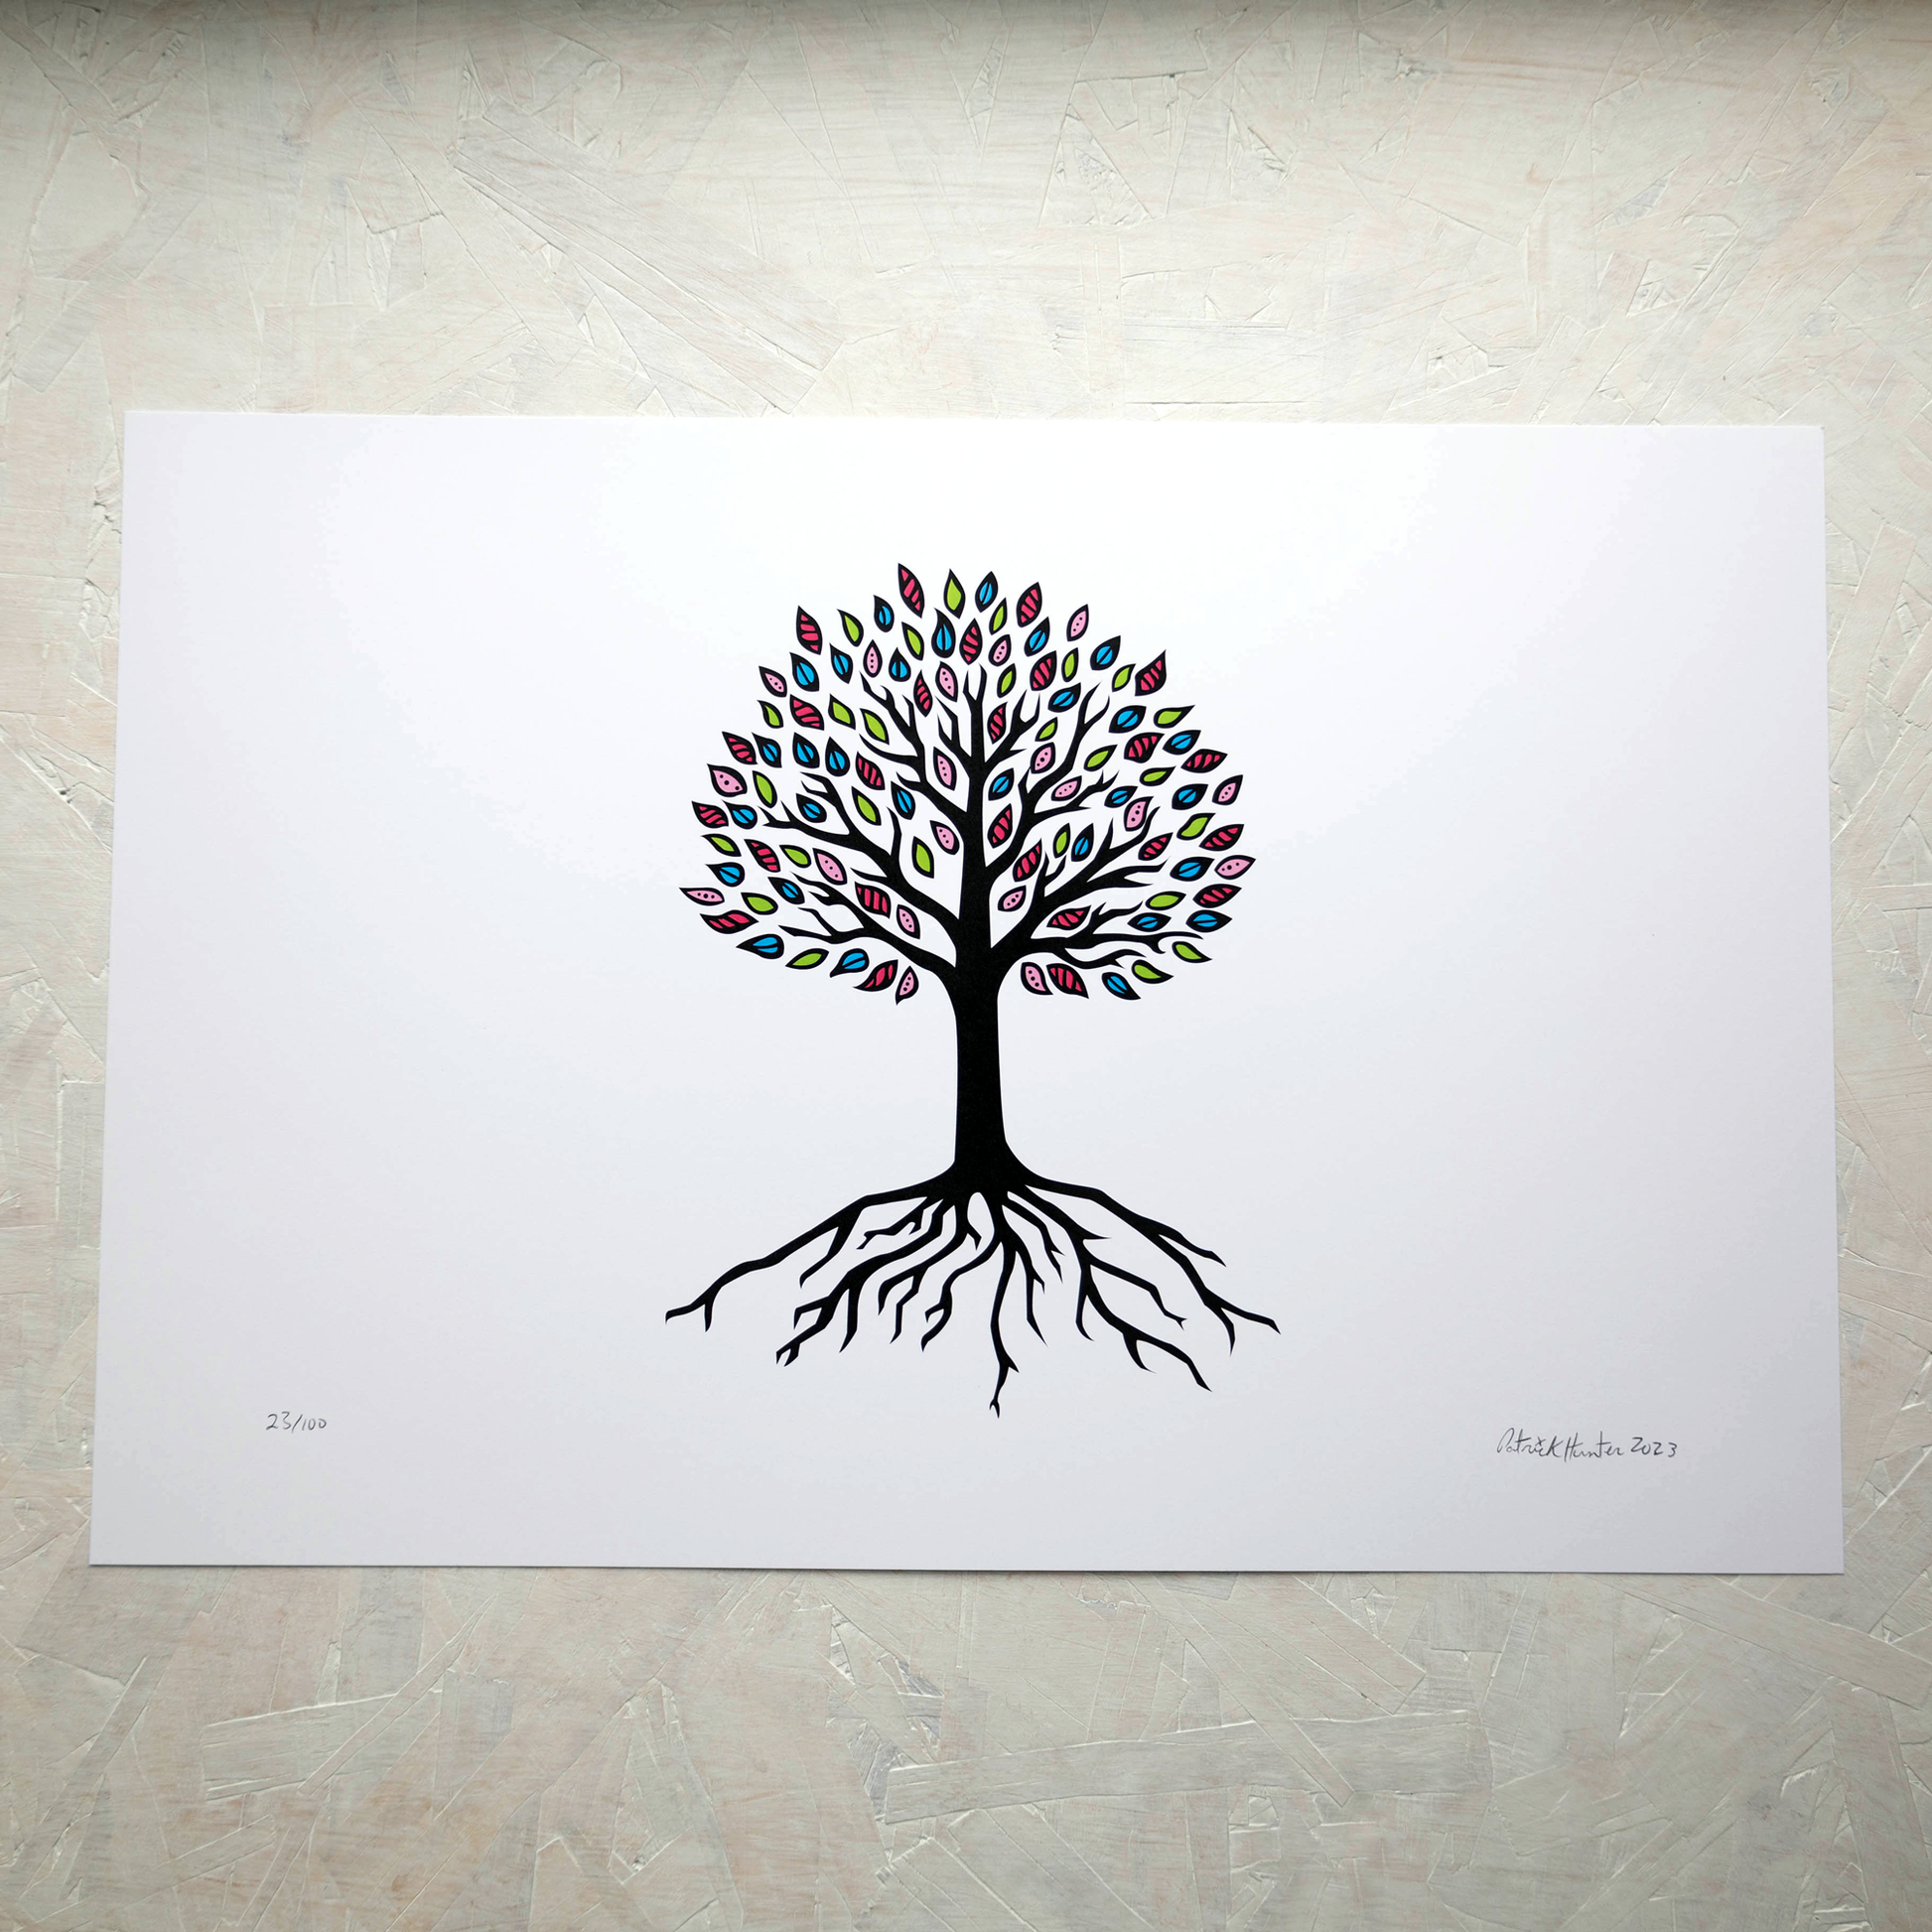 Print of Patrick Hunter's painting of a simplified tree of life, black on white with multicoloured leaves in landscape orientation, woodland art style.